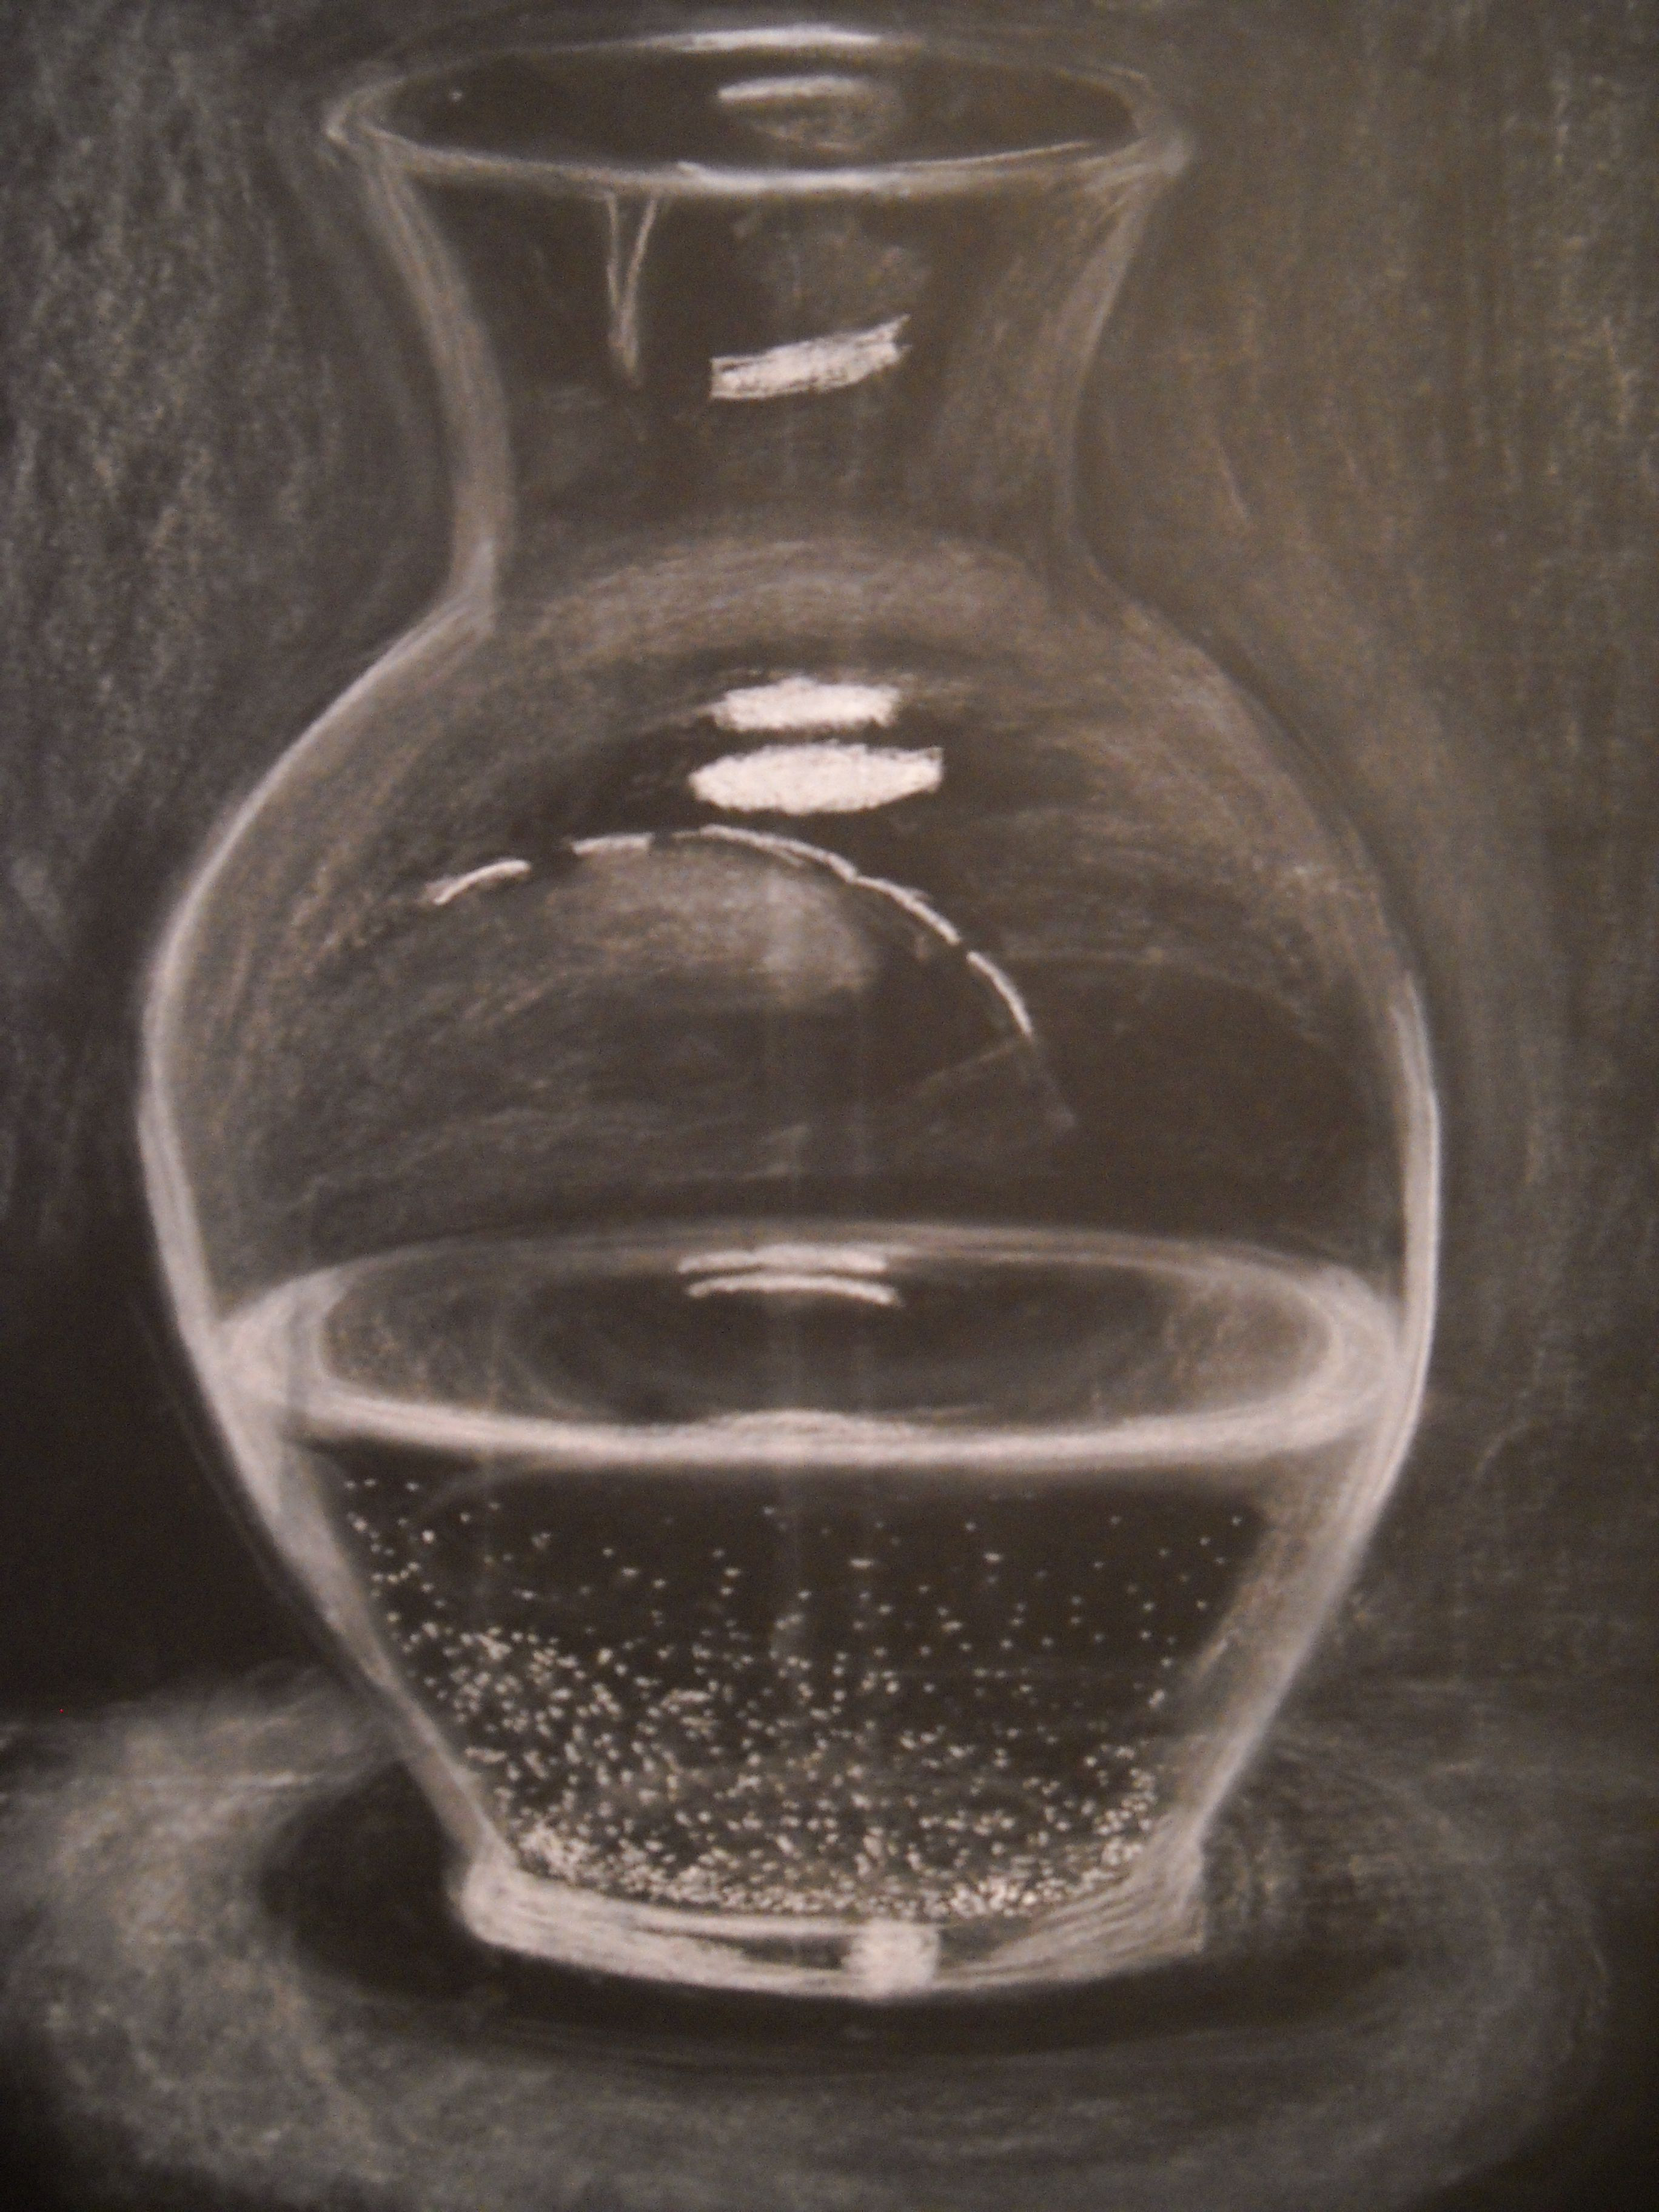 24 Recommended Extra Large Brandy Glass Vase 2024 free download extra large brandy glass vase of glass vase filled with water done in white chalk on black drawing with glass vase filled with water done in white chalk on black drawing paper